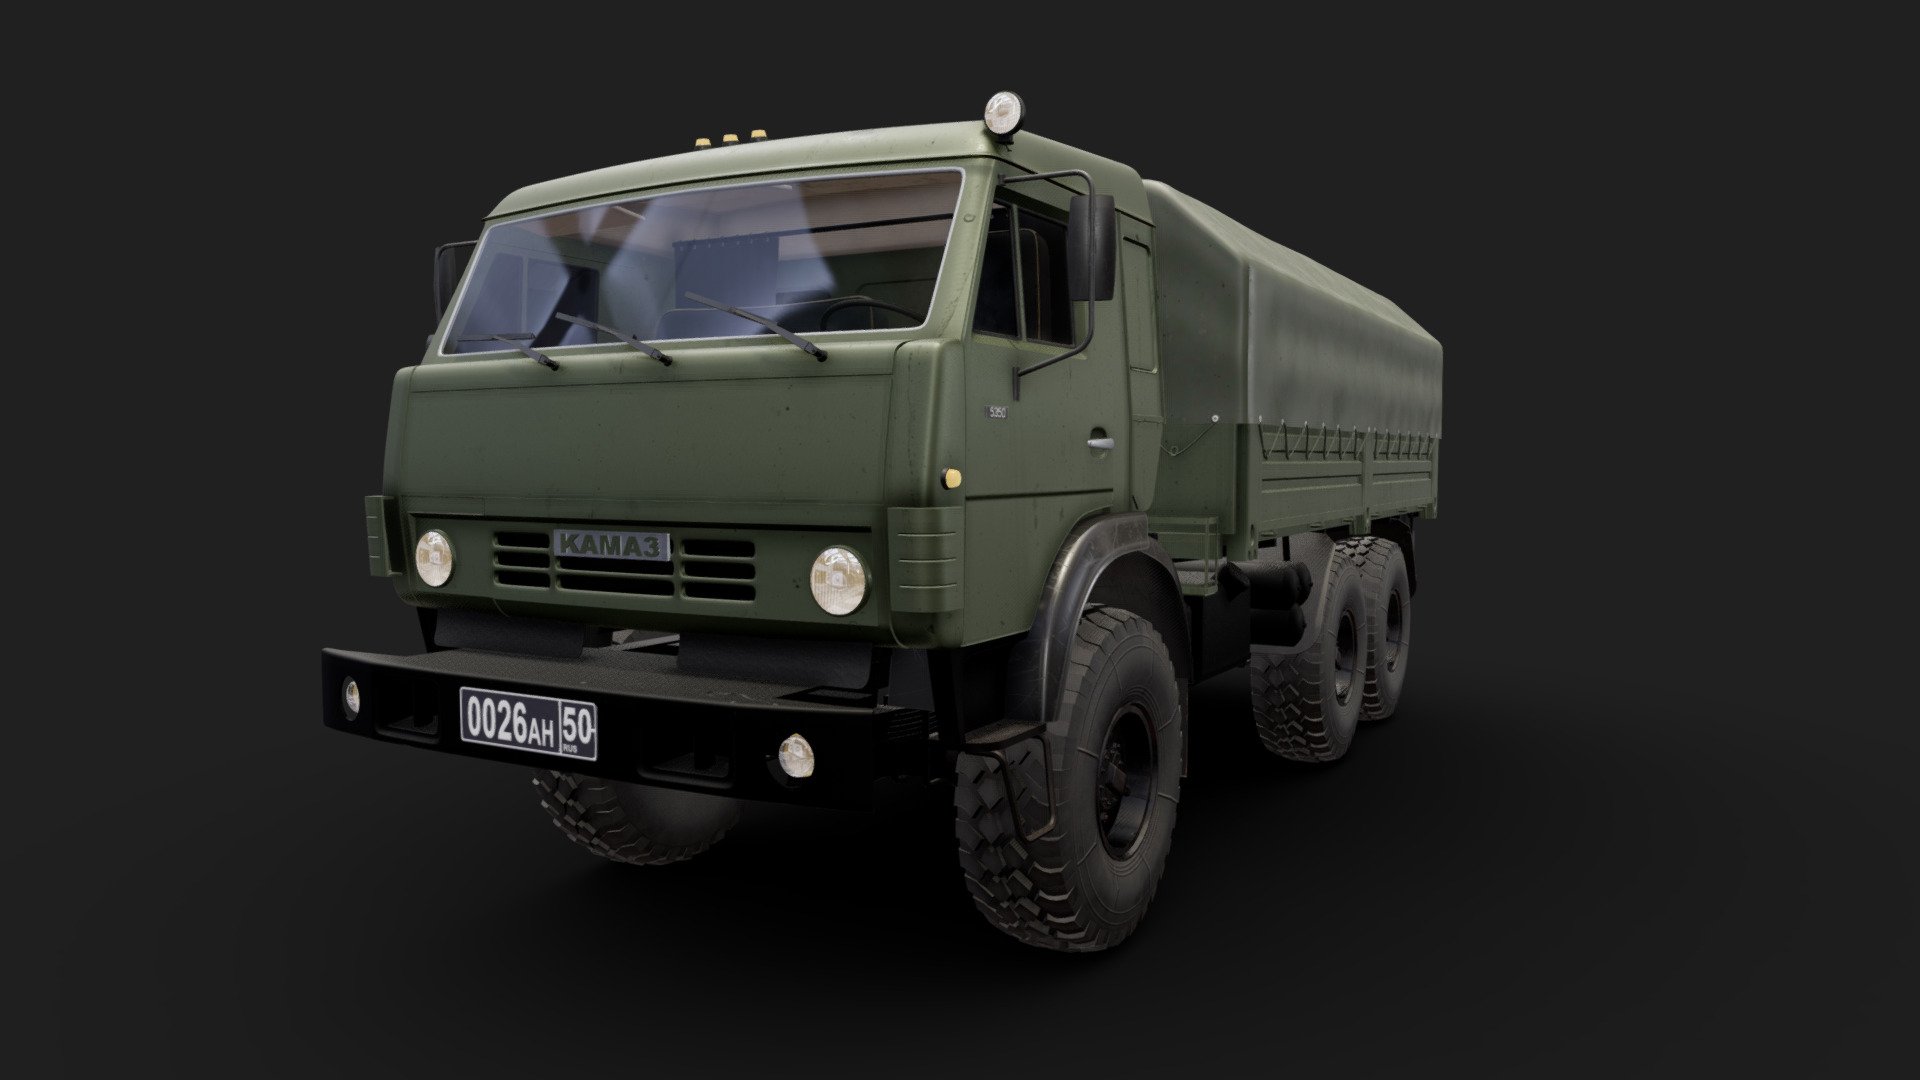 The KamAZ-5350 is a general utility truck that has been in service with the Russian Ground Forces since 2003 when the first vehicles were constructed and delivered. It is a member of the &lsquo;Mustang' family of military utility vehicles, which also includes 4x4 and 8x8 variants 3d model